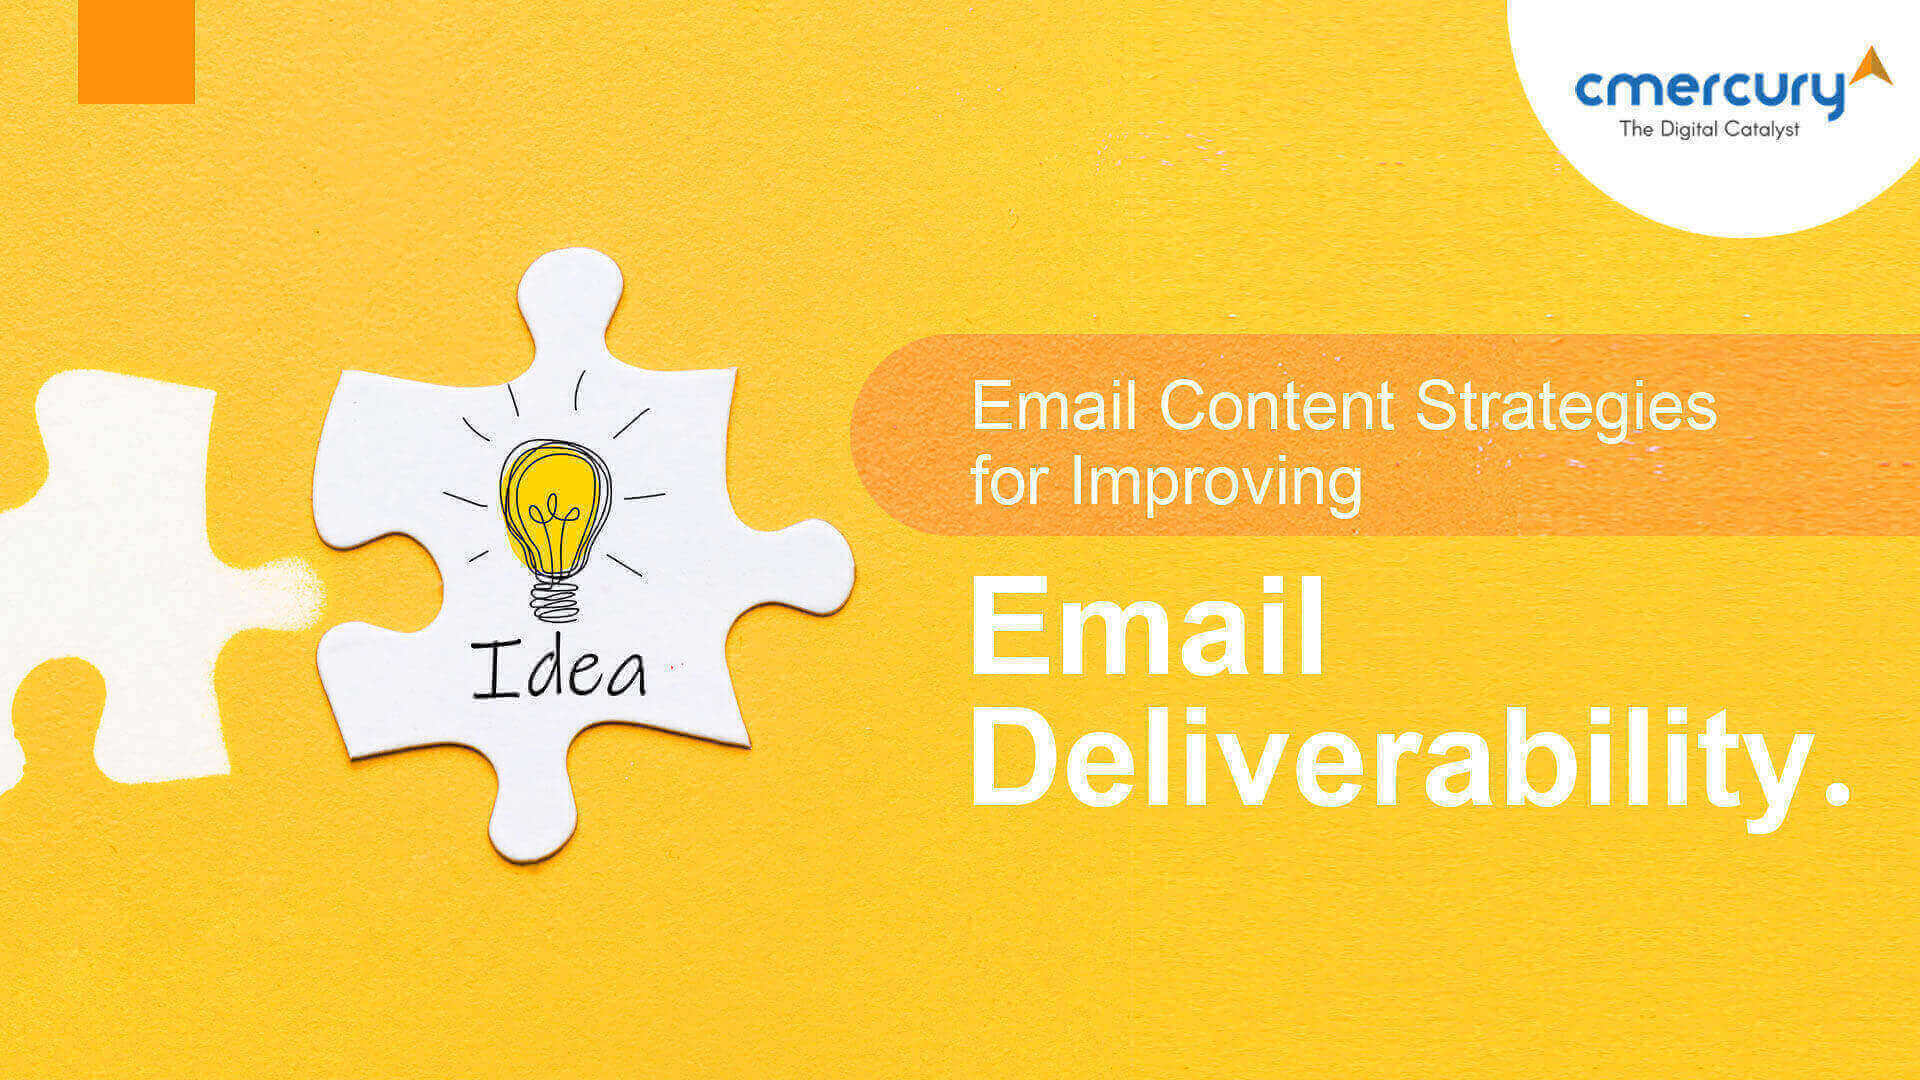 9 secret content strategies to improve email deliverability